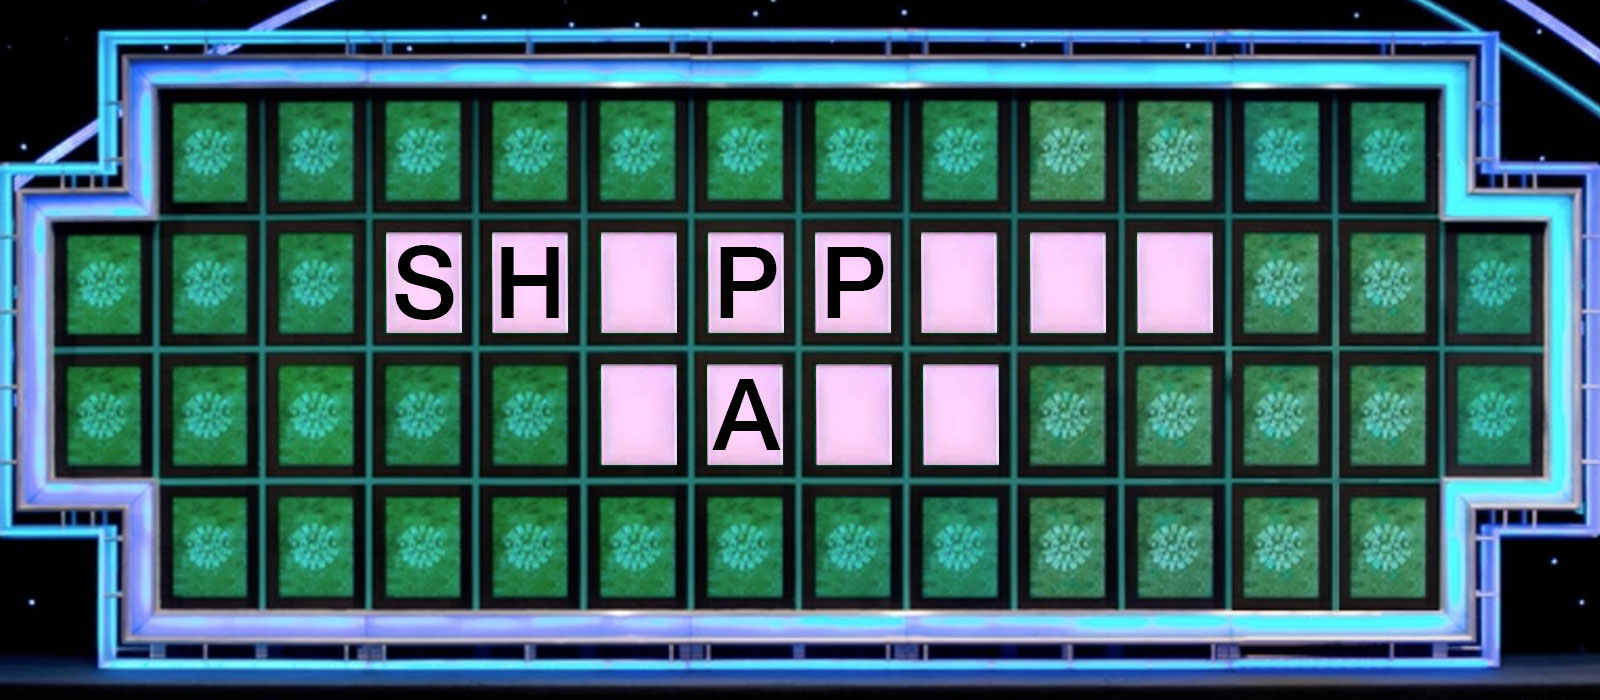 Can You Solve These Wheel of Fortune Puzzles? Quiz 518